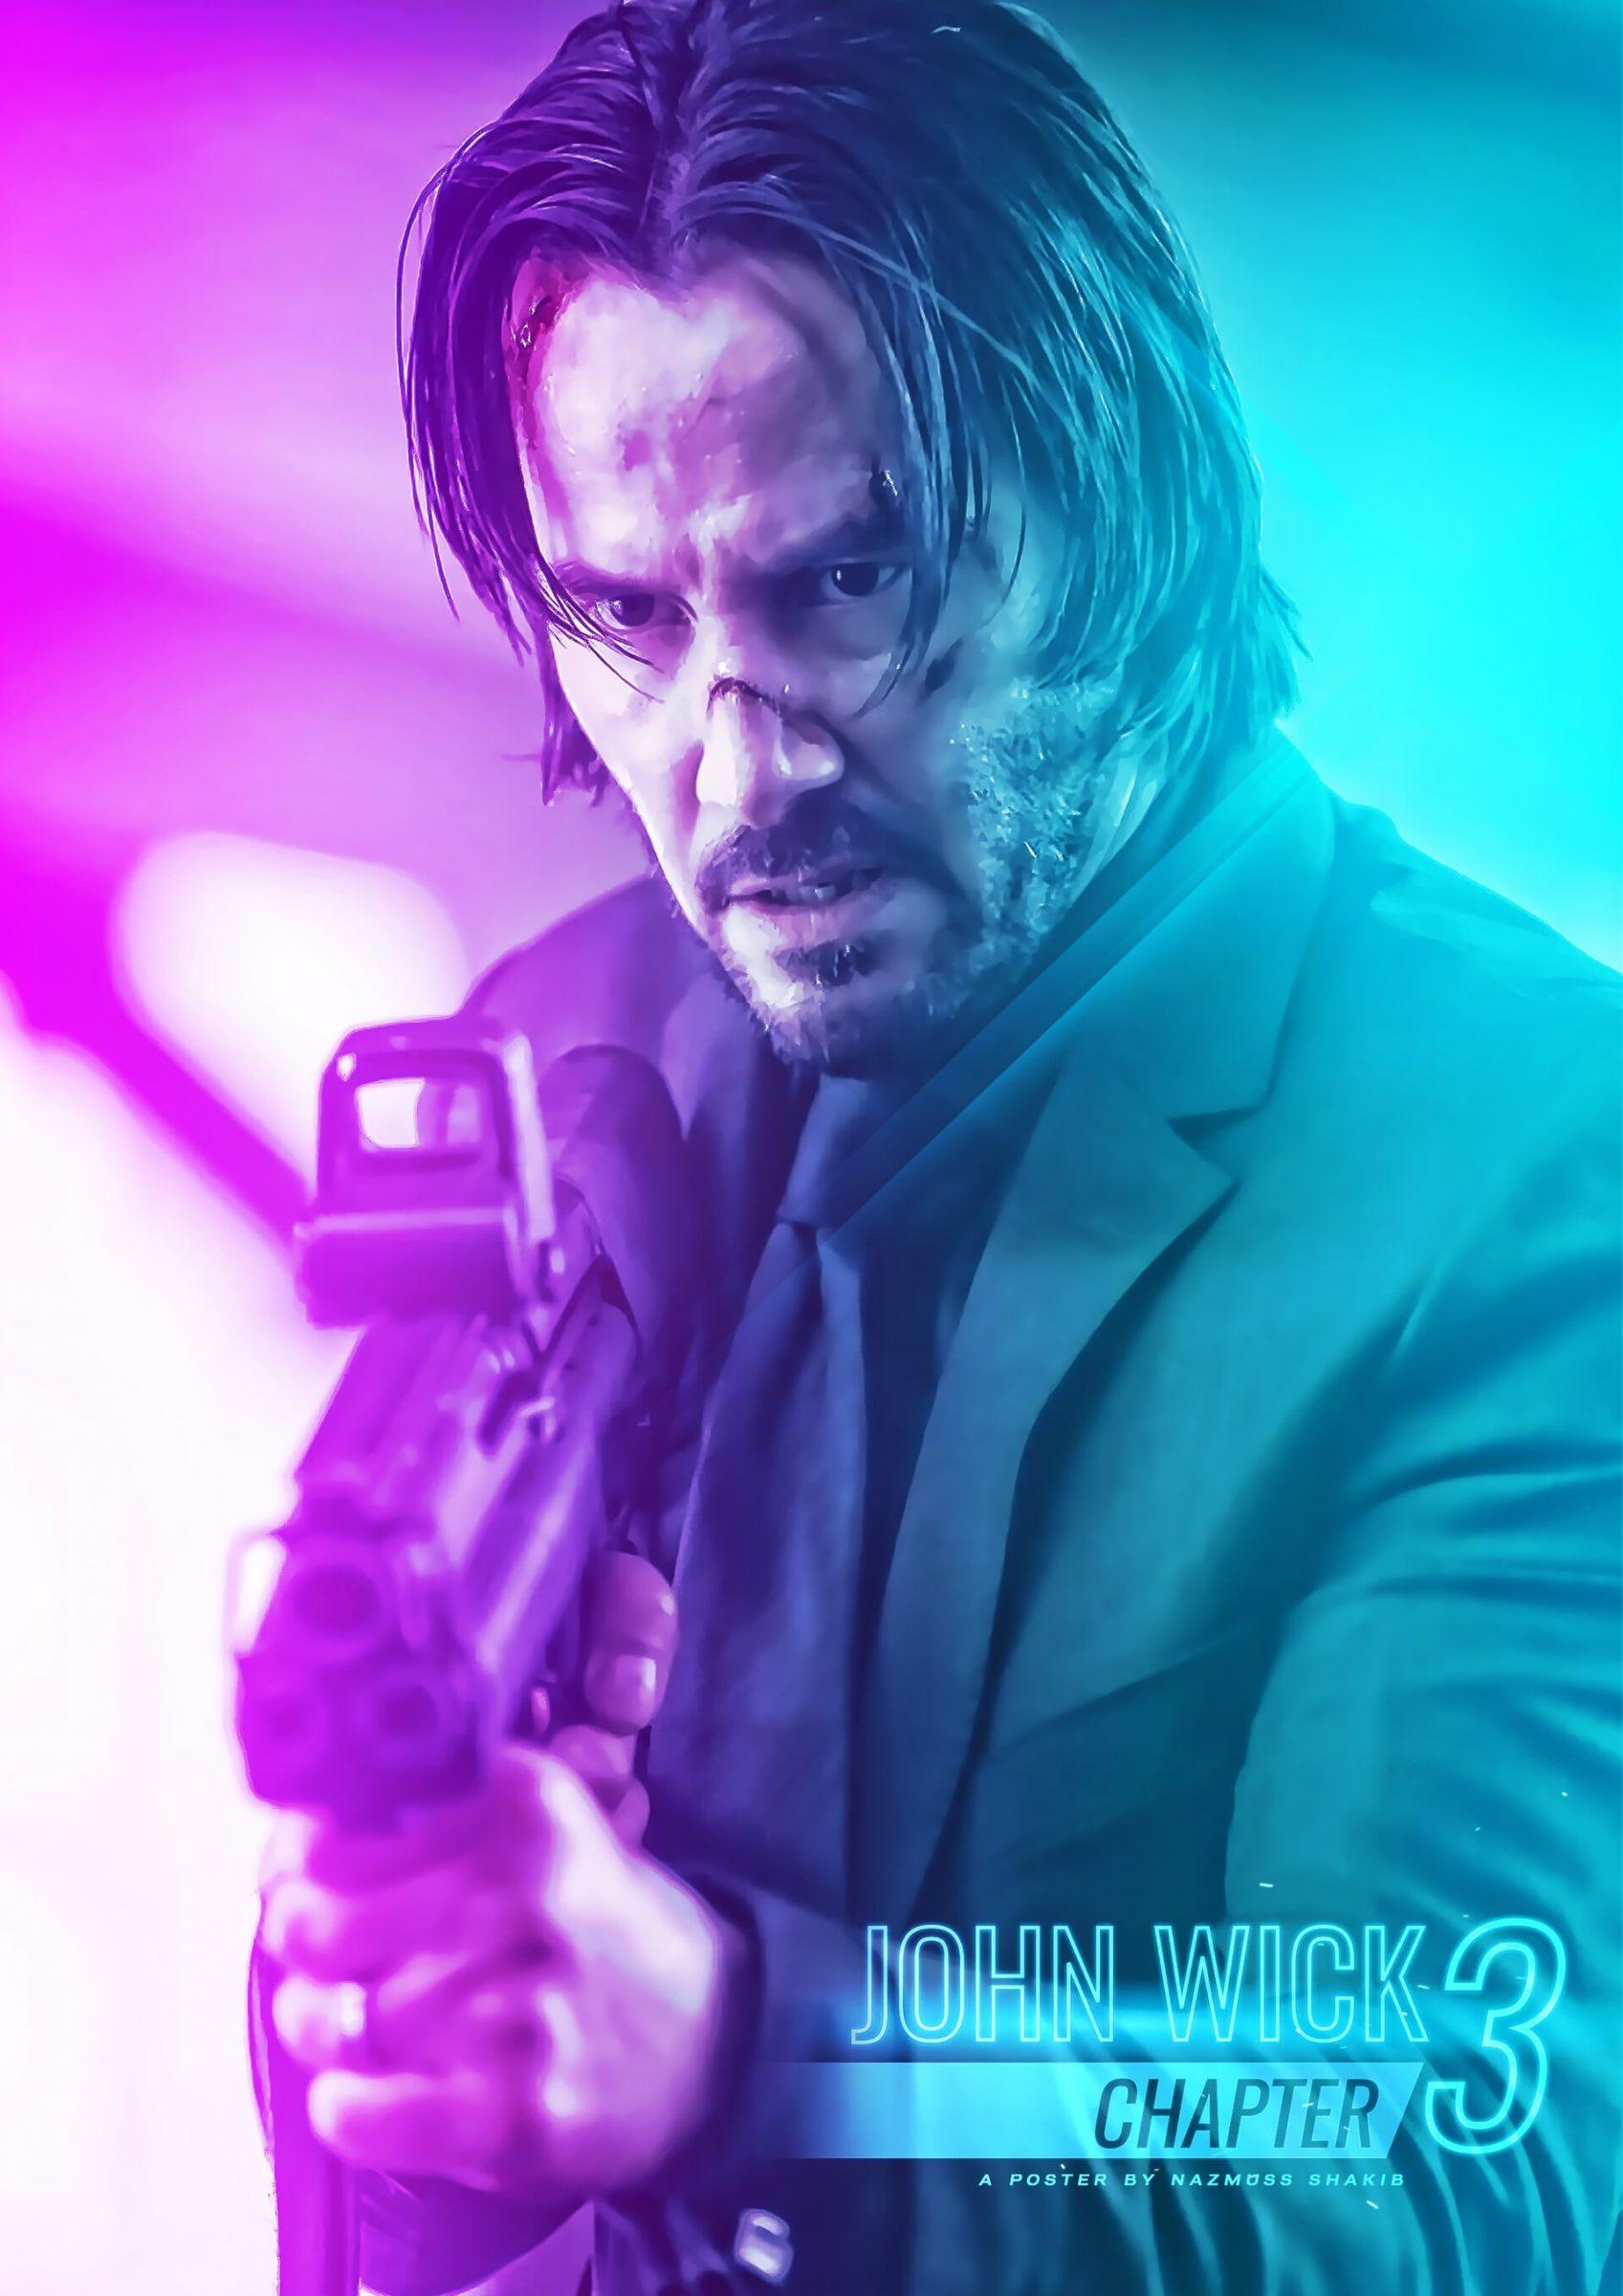 John Wick 3 Android Wallpapers - Wallpaper Cave